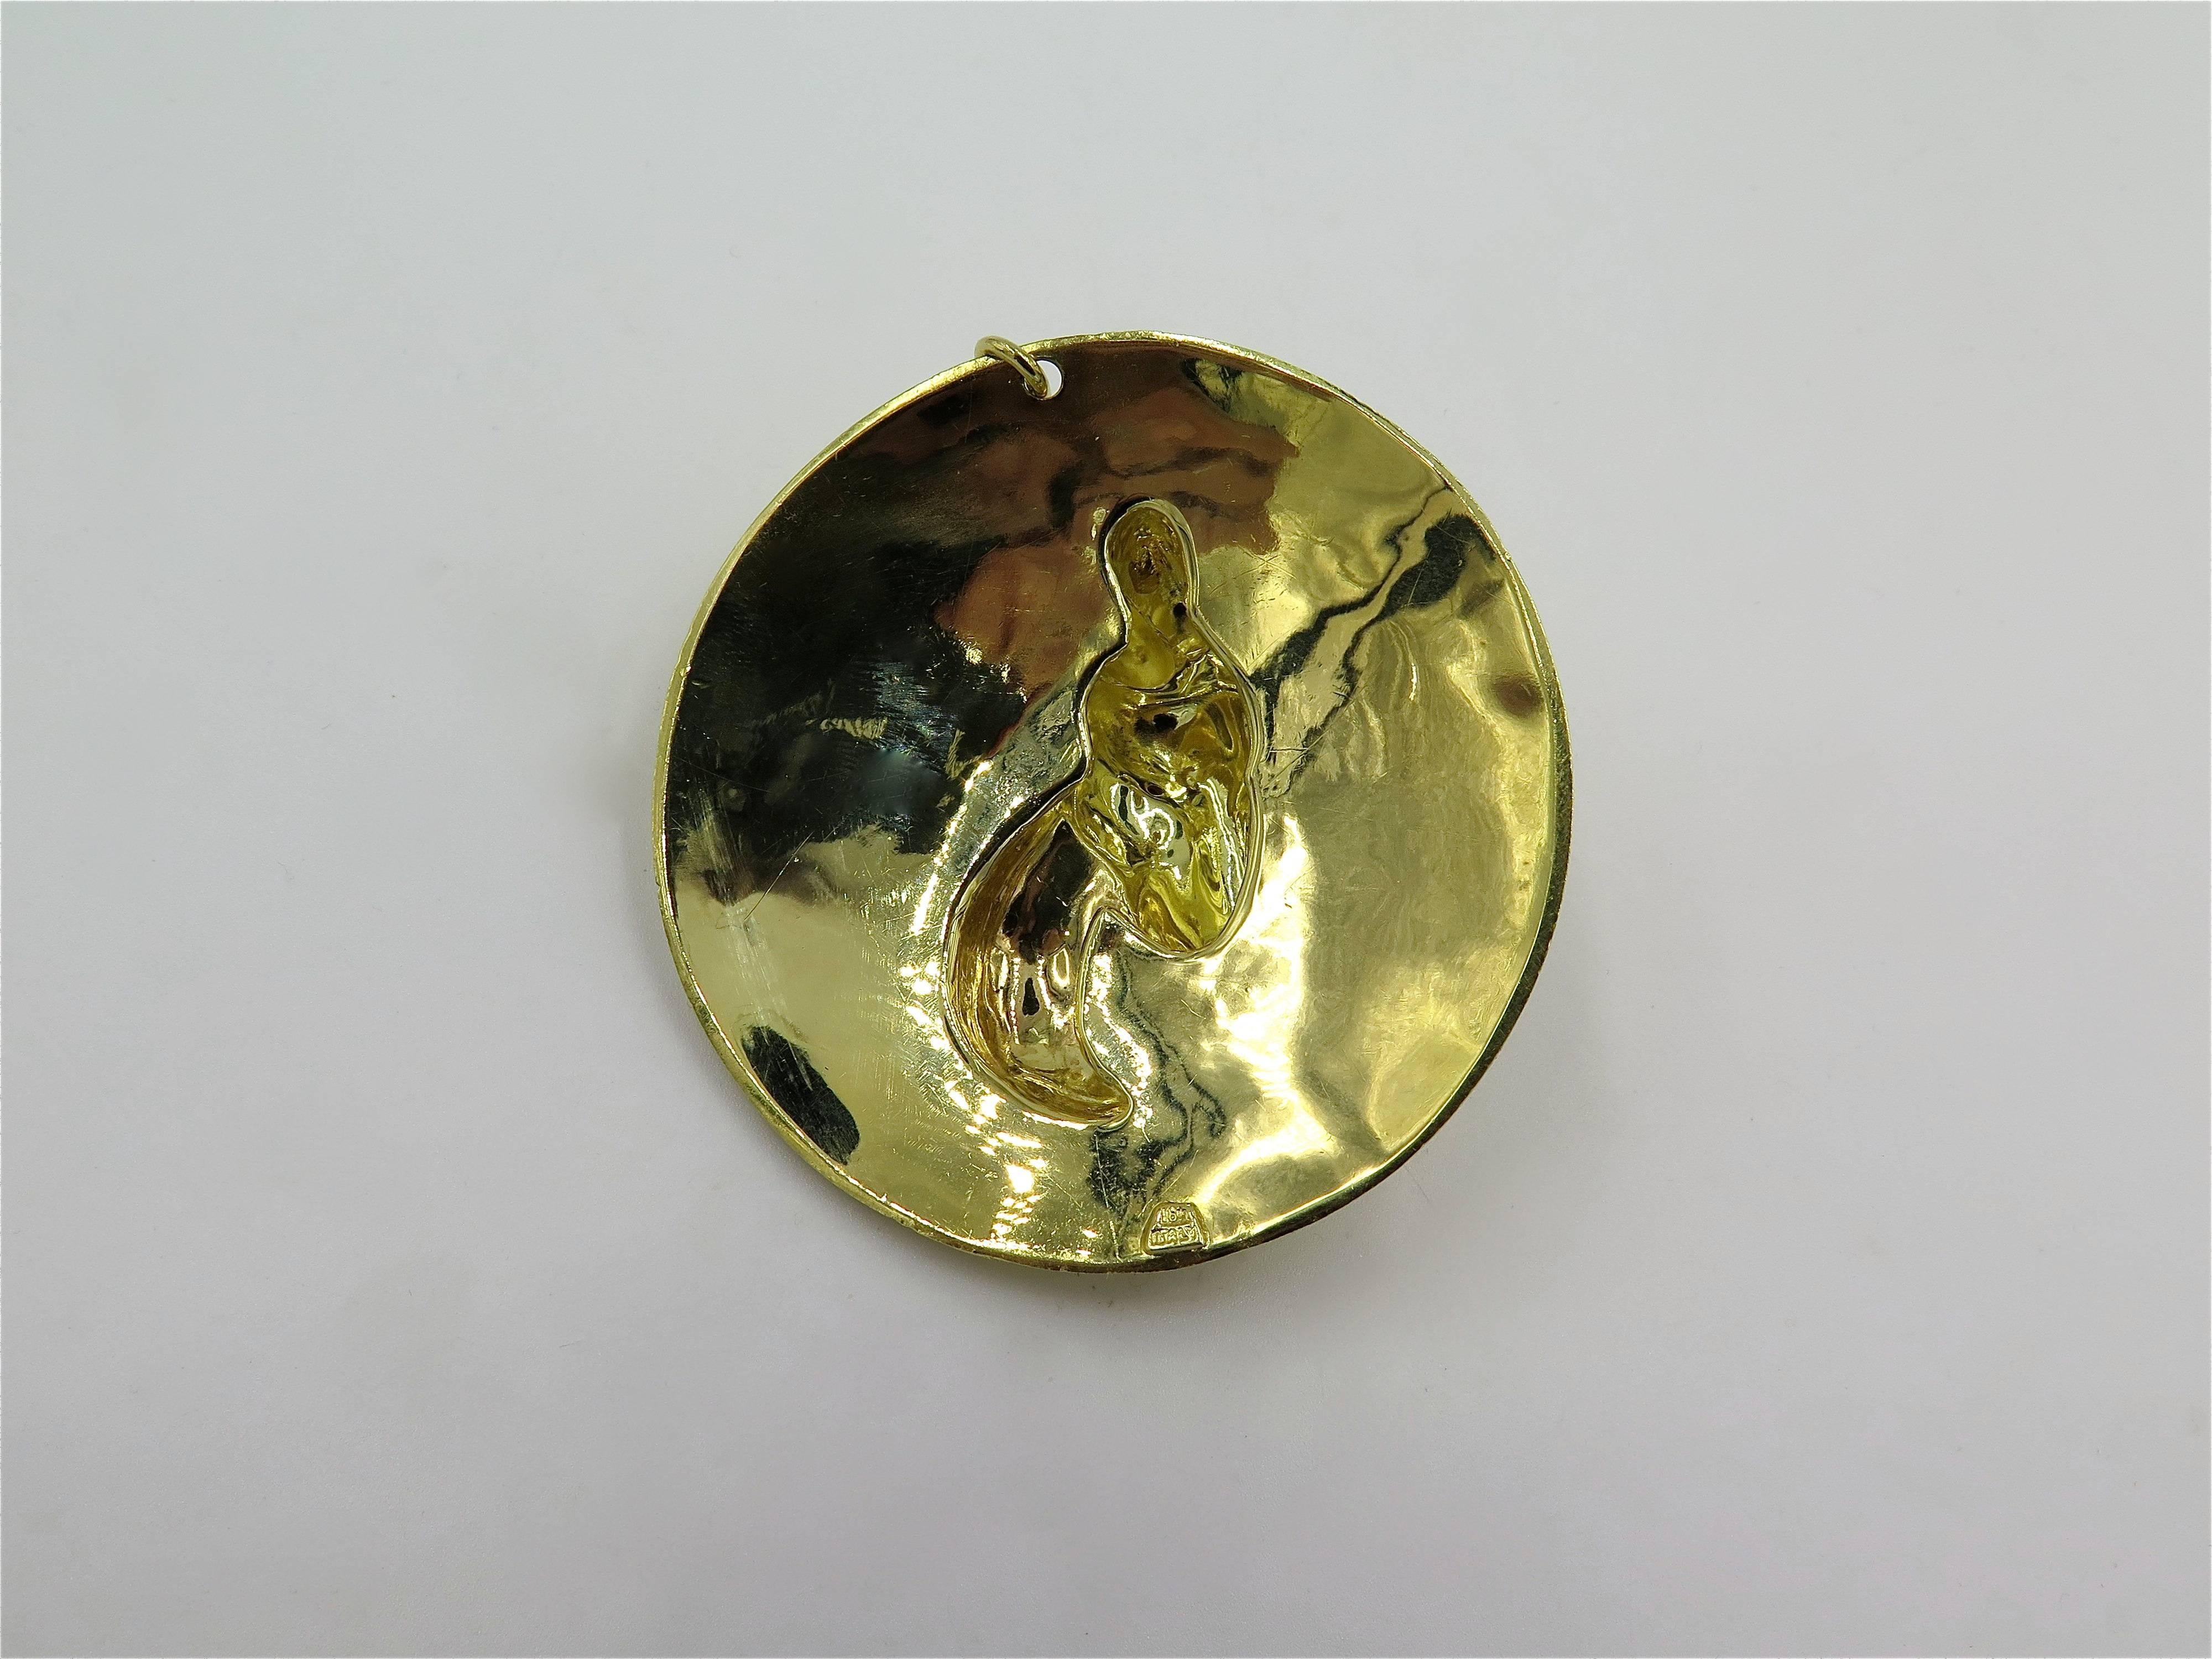 An 18 karat yellow gold pendant. Italian. Circa 1970. Designed as 18 karat yellow gold disk, set with a hammered gold ram, enhanced by circular cut ruby eyes. Diameter is approximately 2 1/4 inches, gross weight is approximately 51.6 grams.